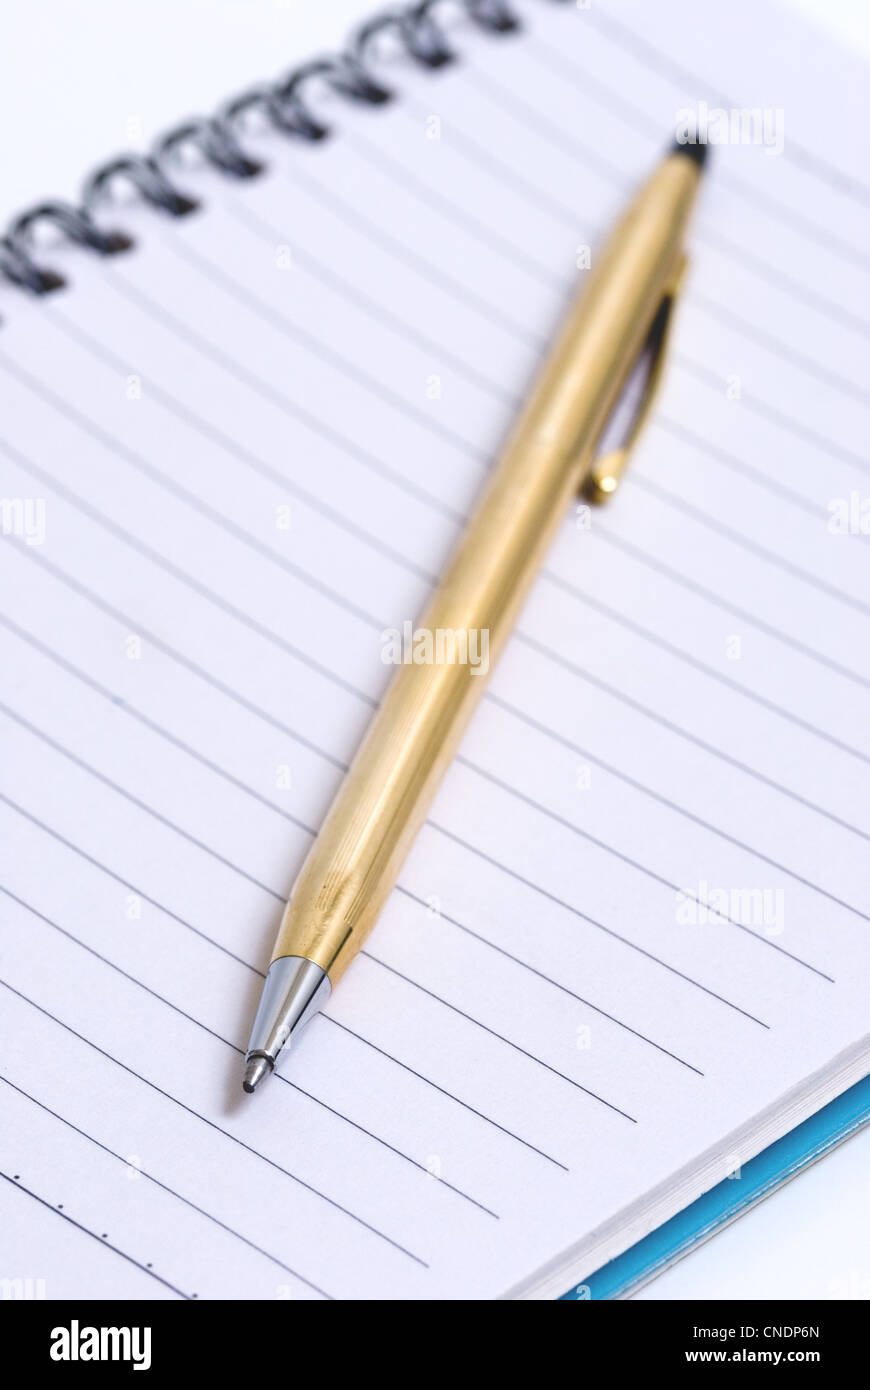 Macro image of a gold pen on lined paper notebook, business concept. Stock Photo